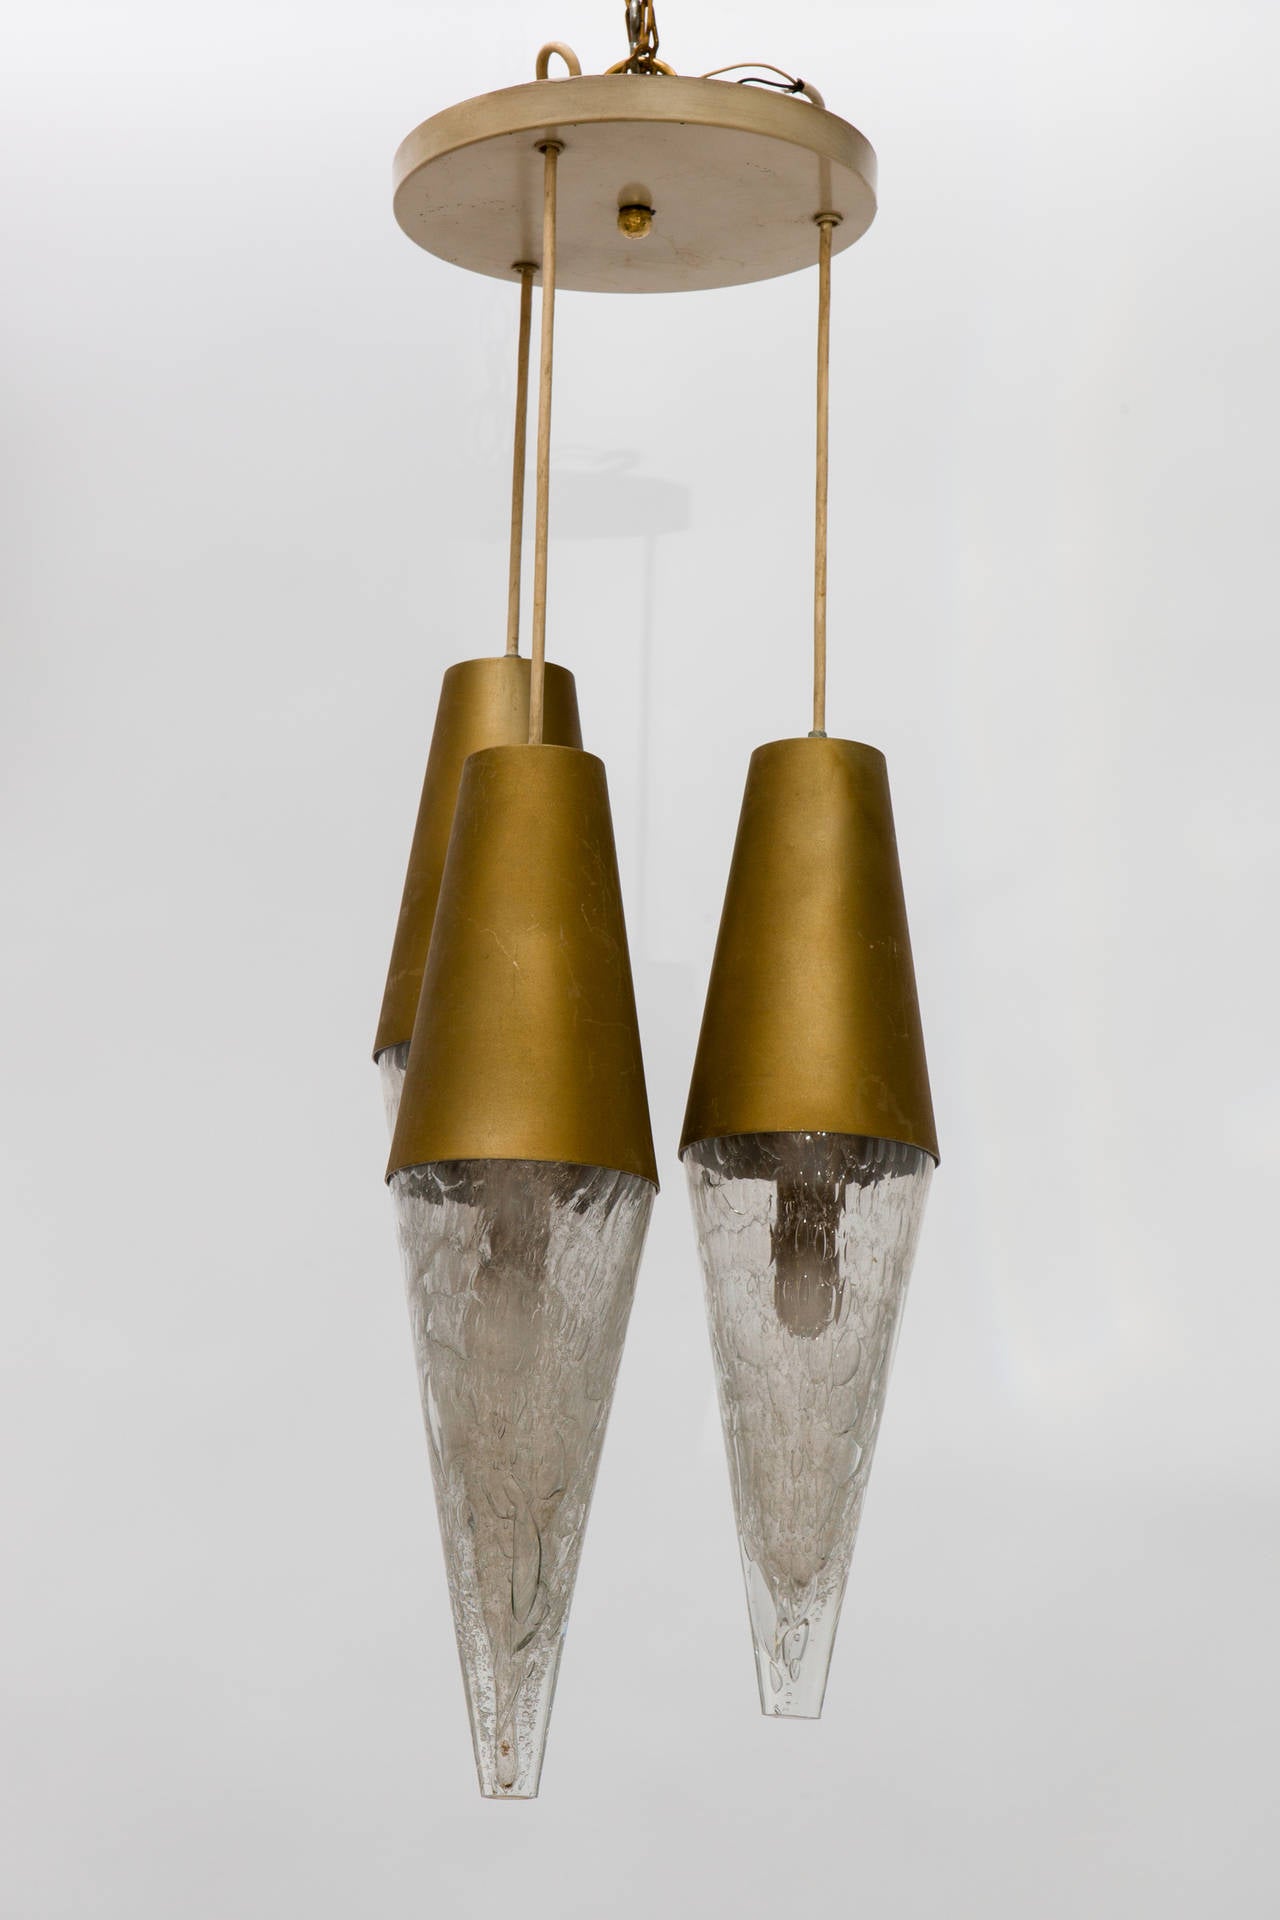 Mid-20th Century German Midcentury Staggered Pendant Fixture For Sale